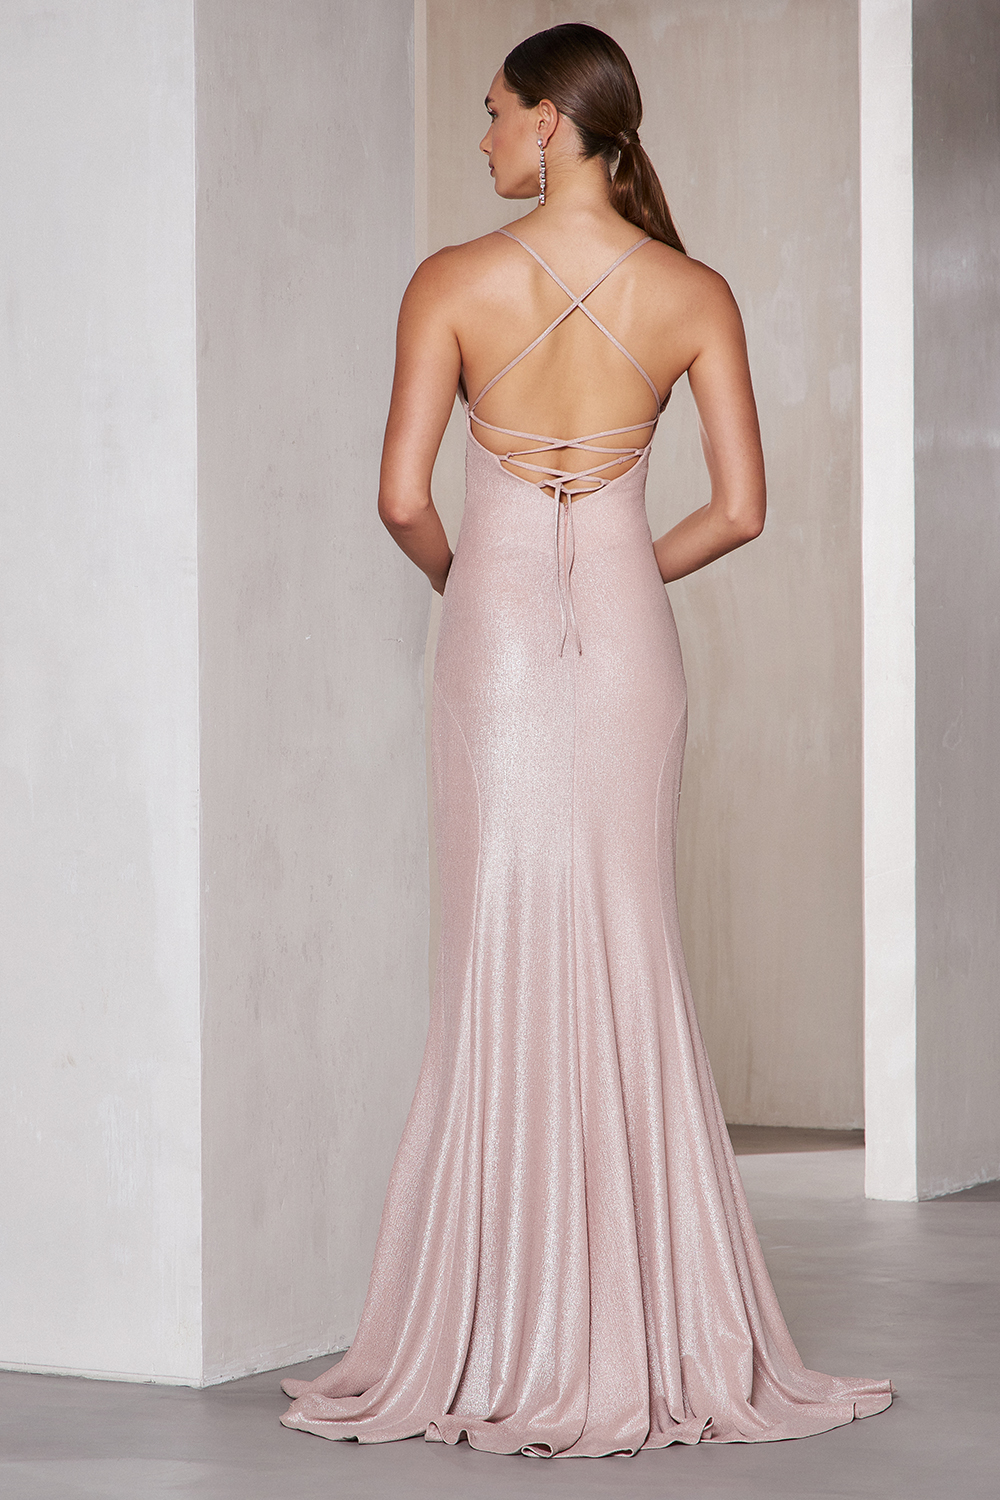 Cocktail Dresses / Long cocktail dress with shining fabric and open back